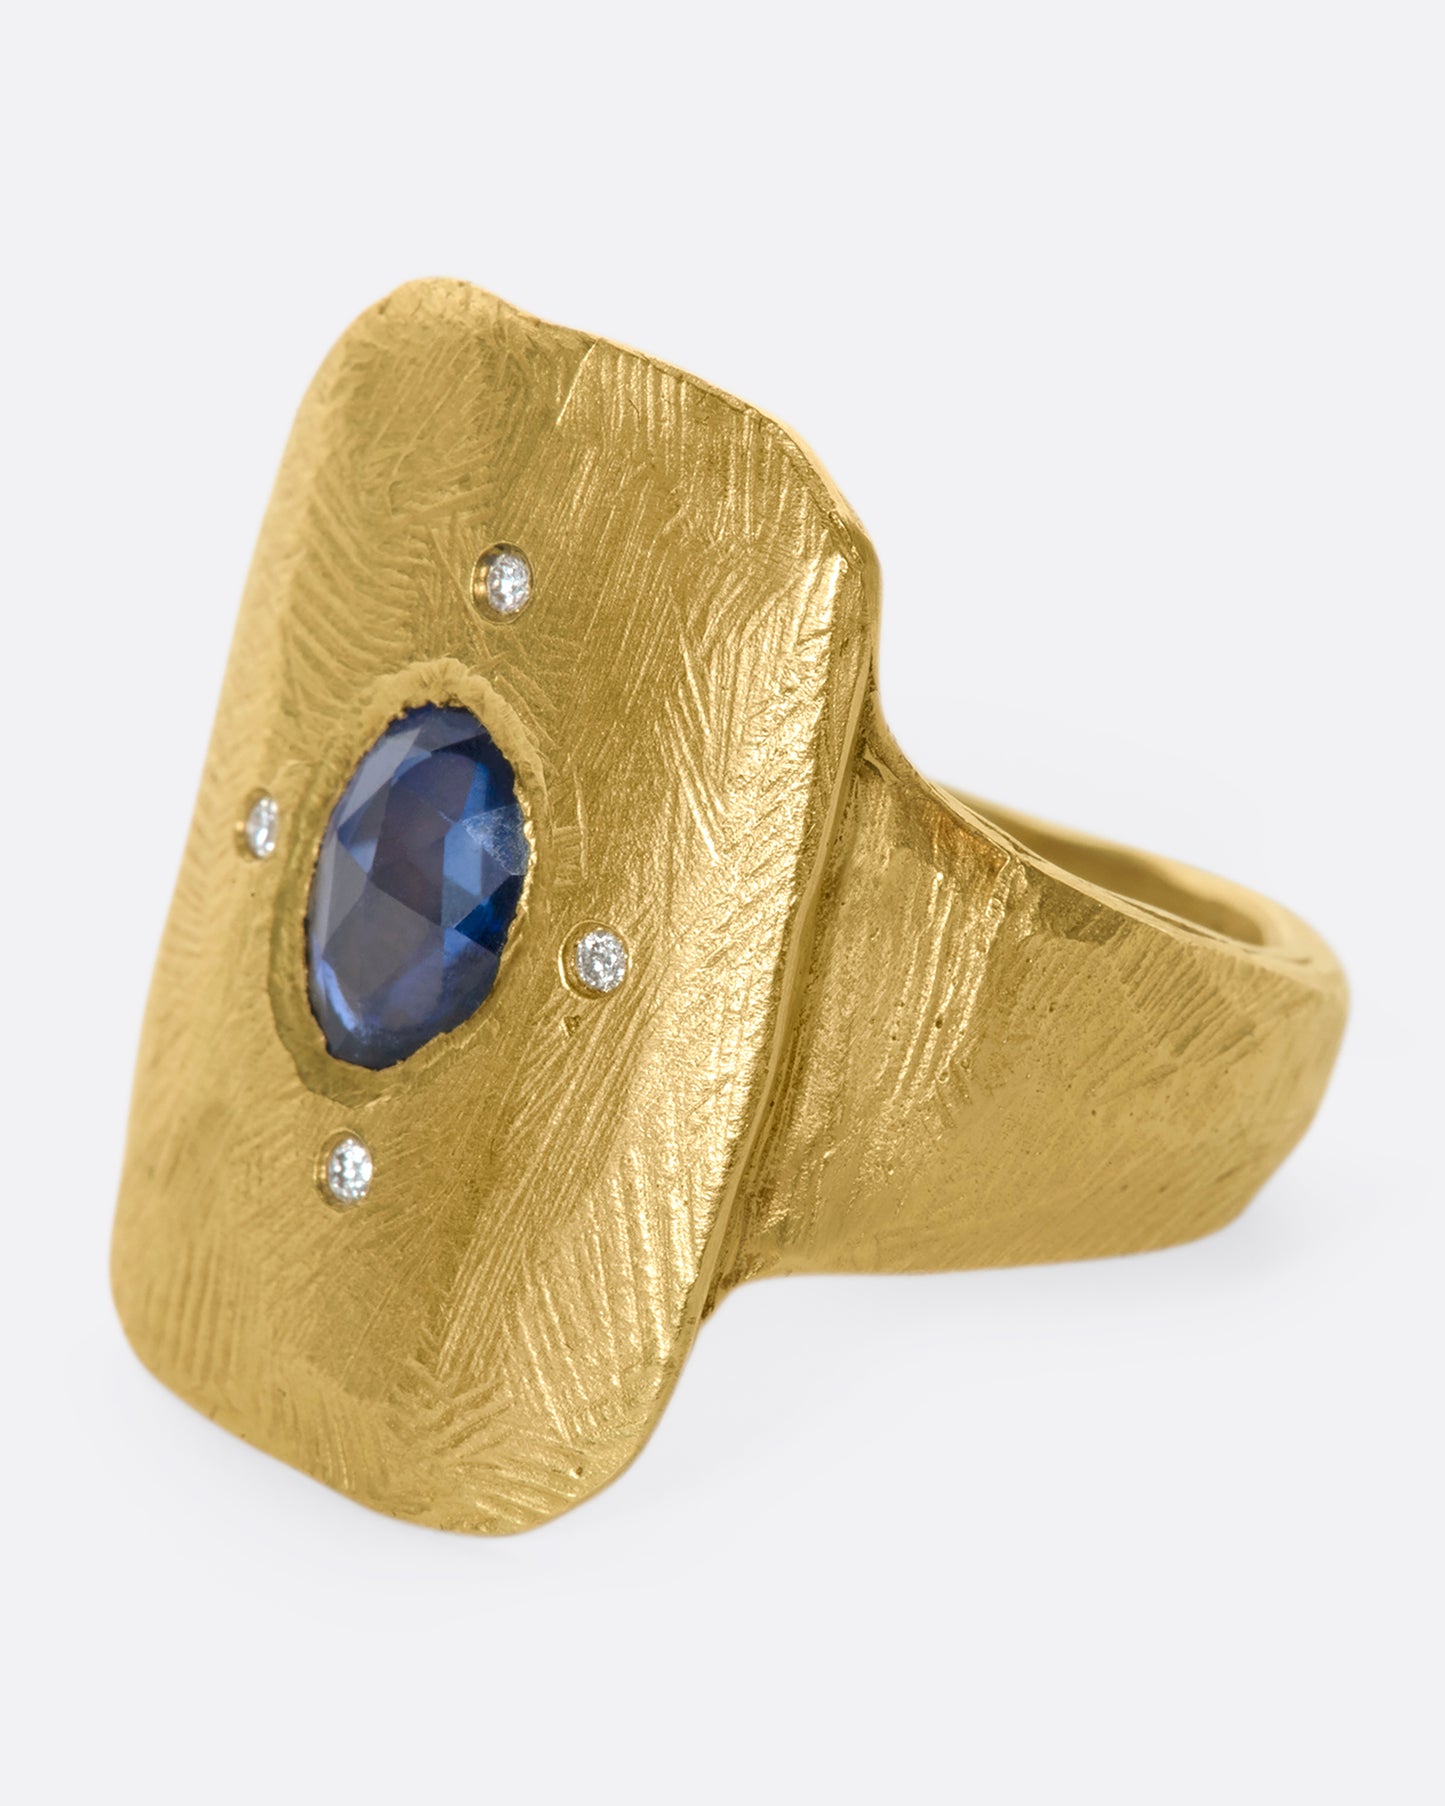 An 18k gold hand carved cocktail ring with a rose-cut, dark blue sapphire dotted with four star-like diamonds